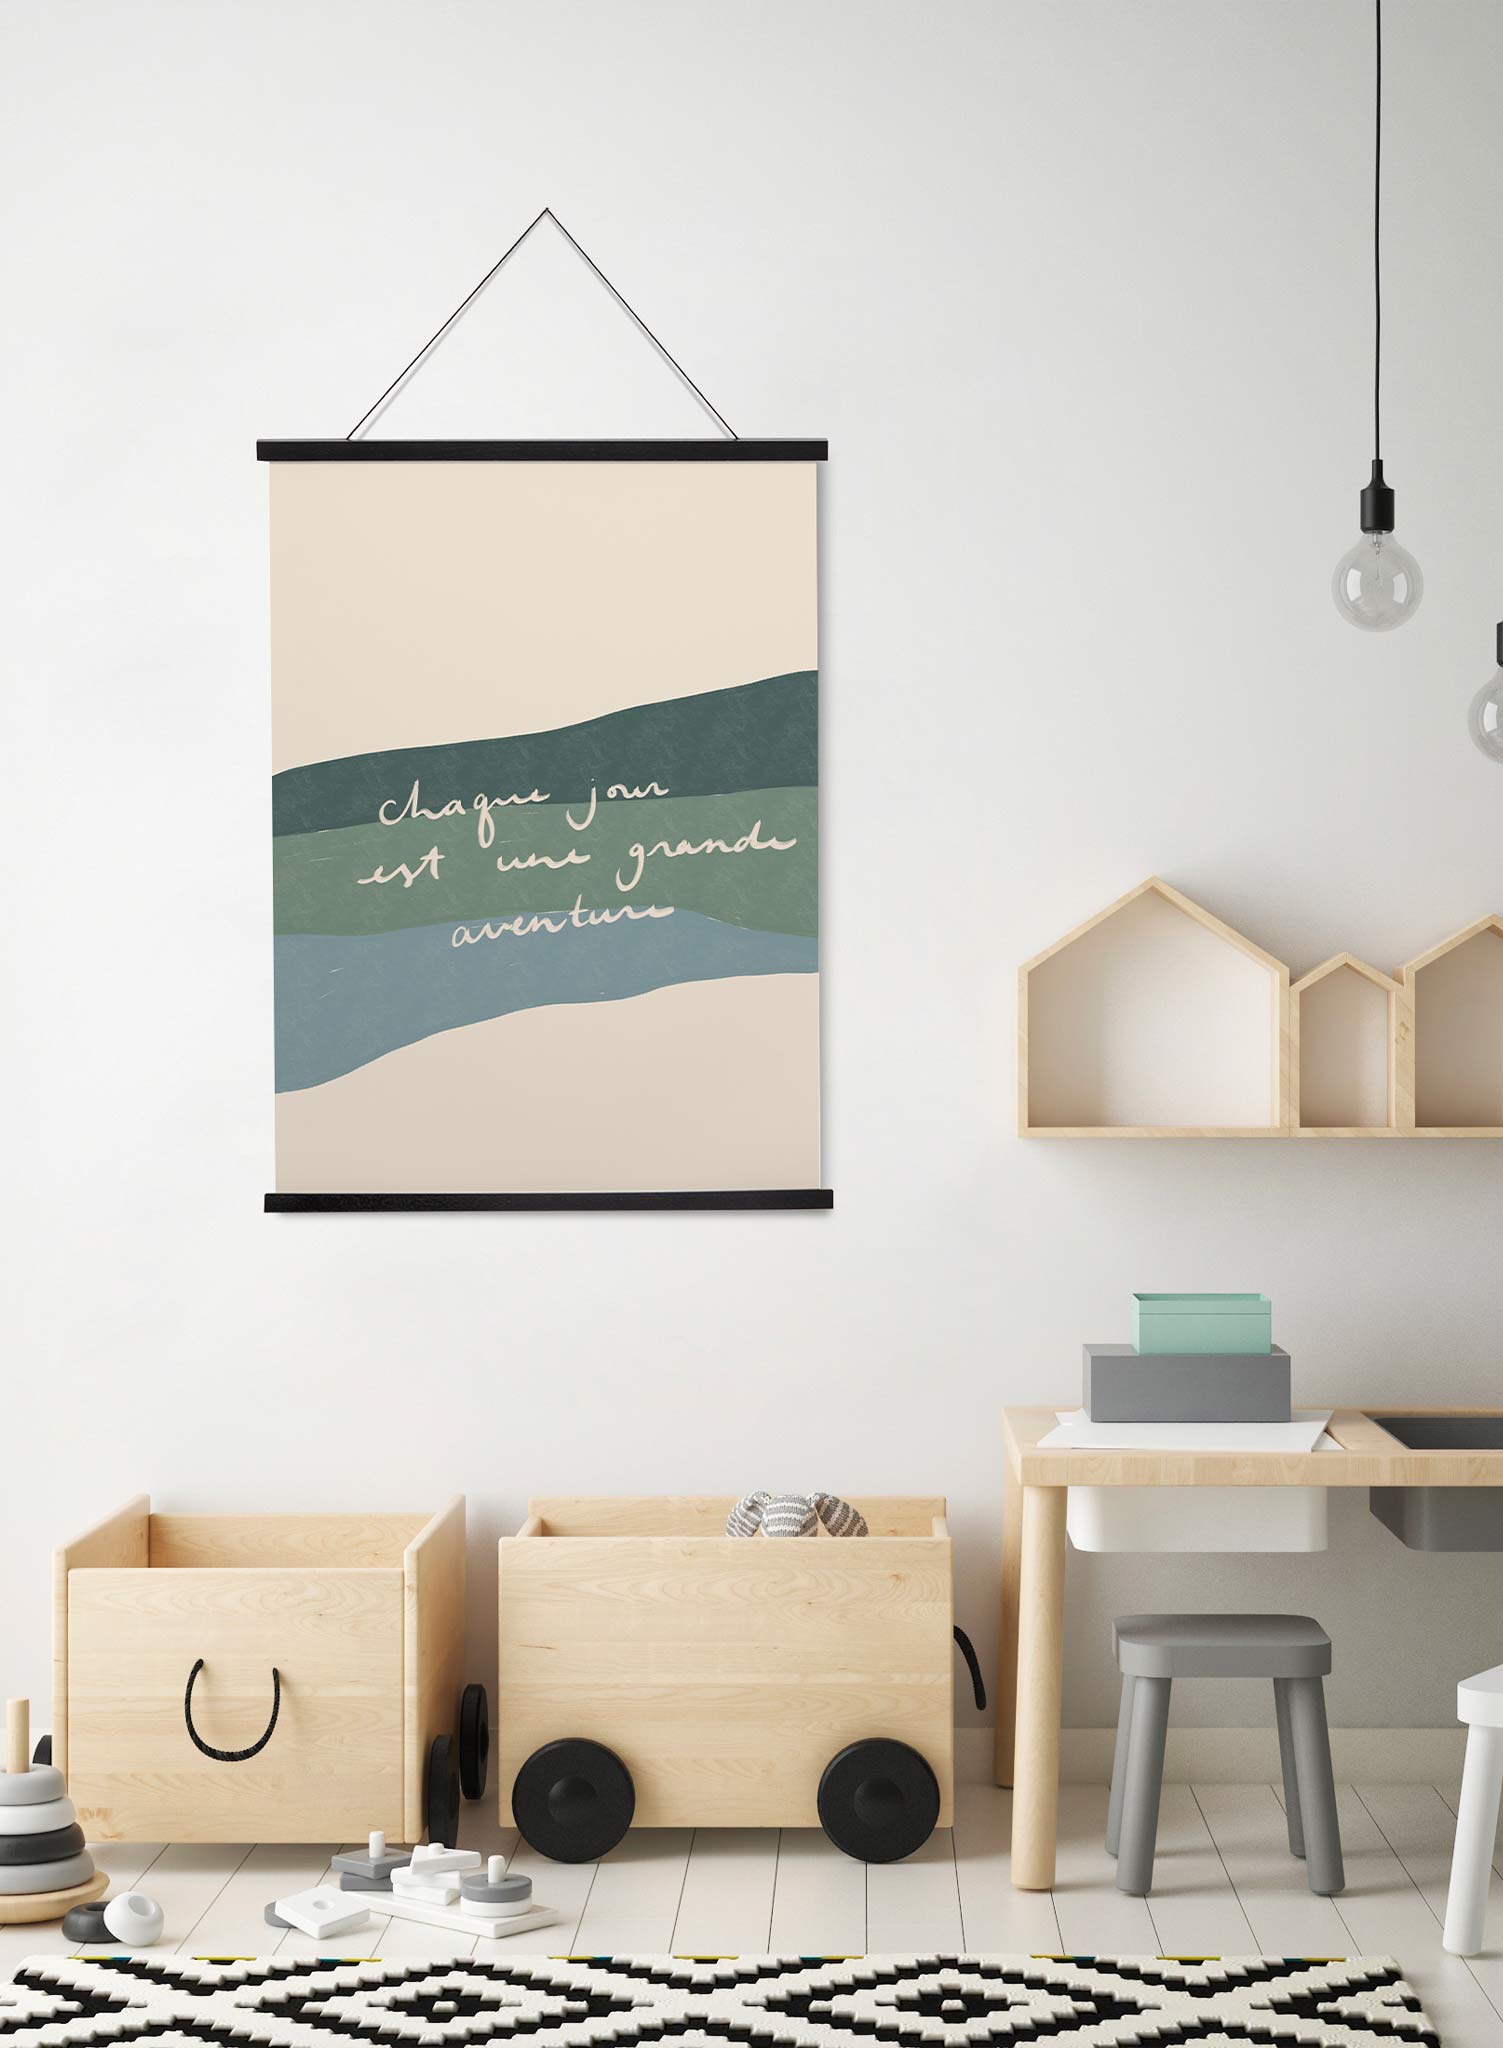 Daily Adventure is a minimalist typography by Opposite Wall of the cursive words "Chaque jour est une grande aventure" in French layered over strokes of blue and green. 